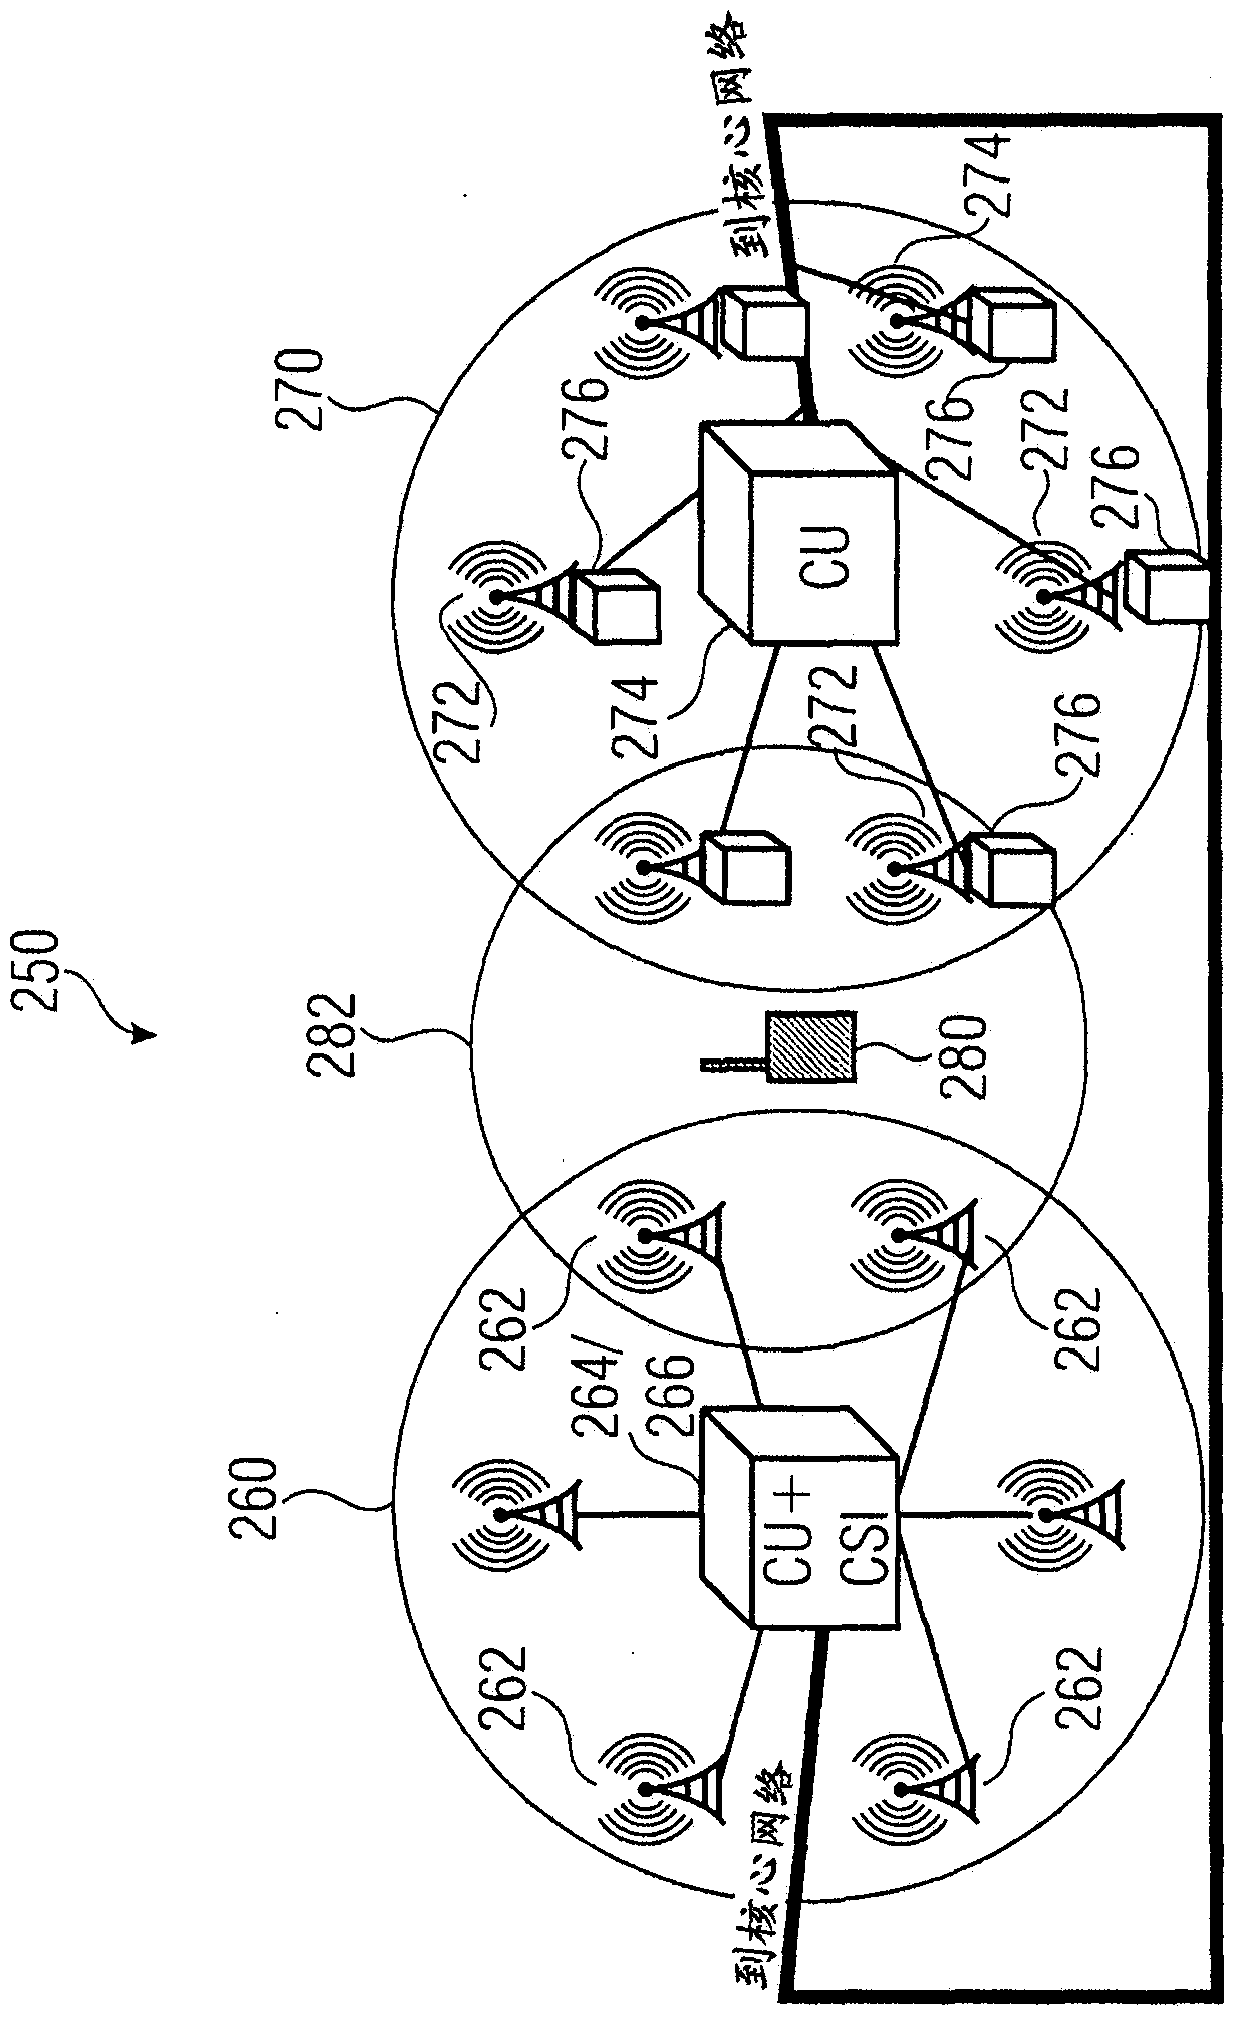 Apparatus and method for determining a control unit using feasibility requests and feasibility responses